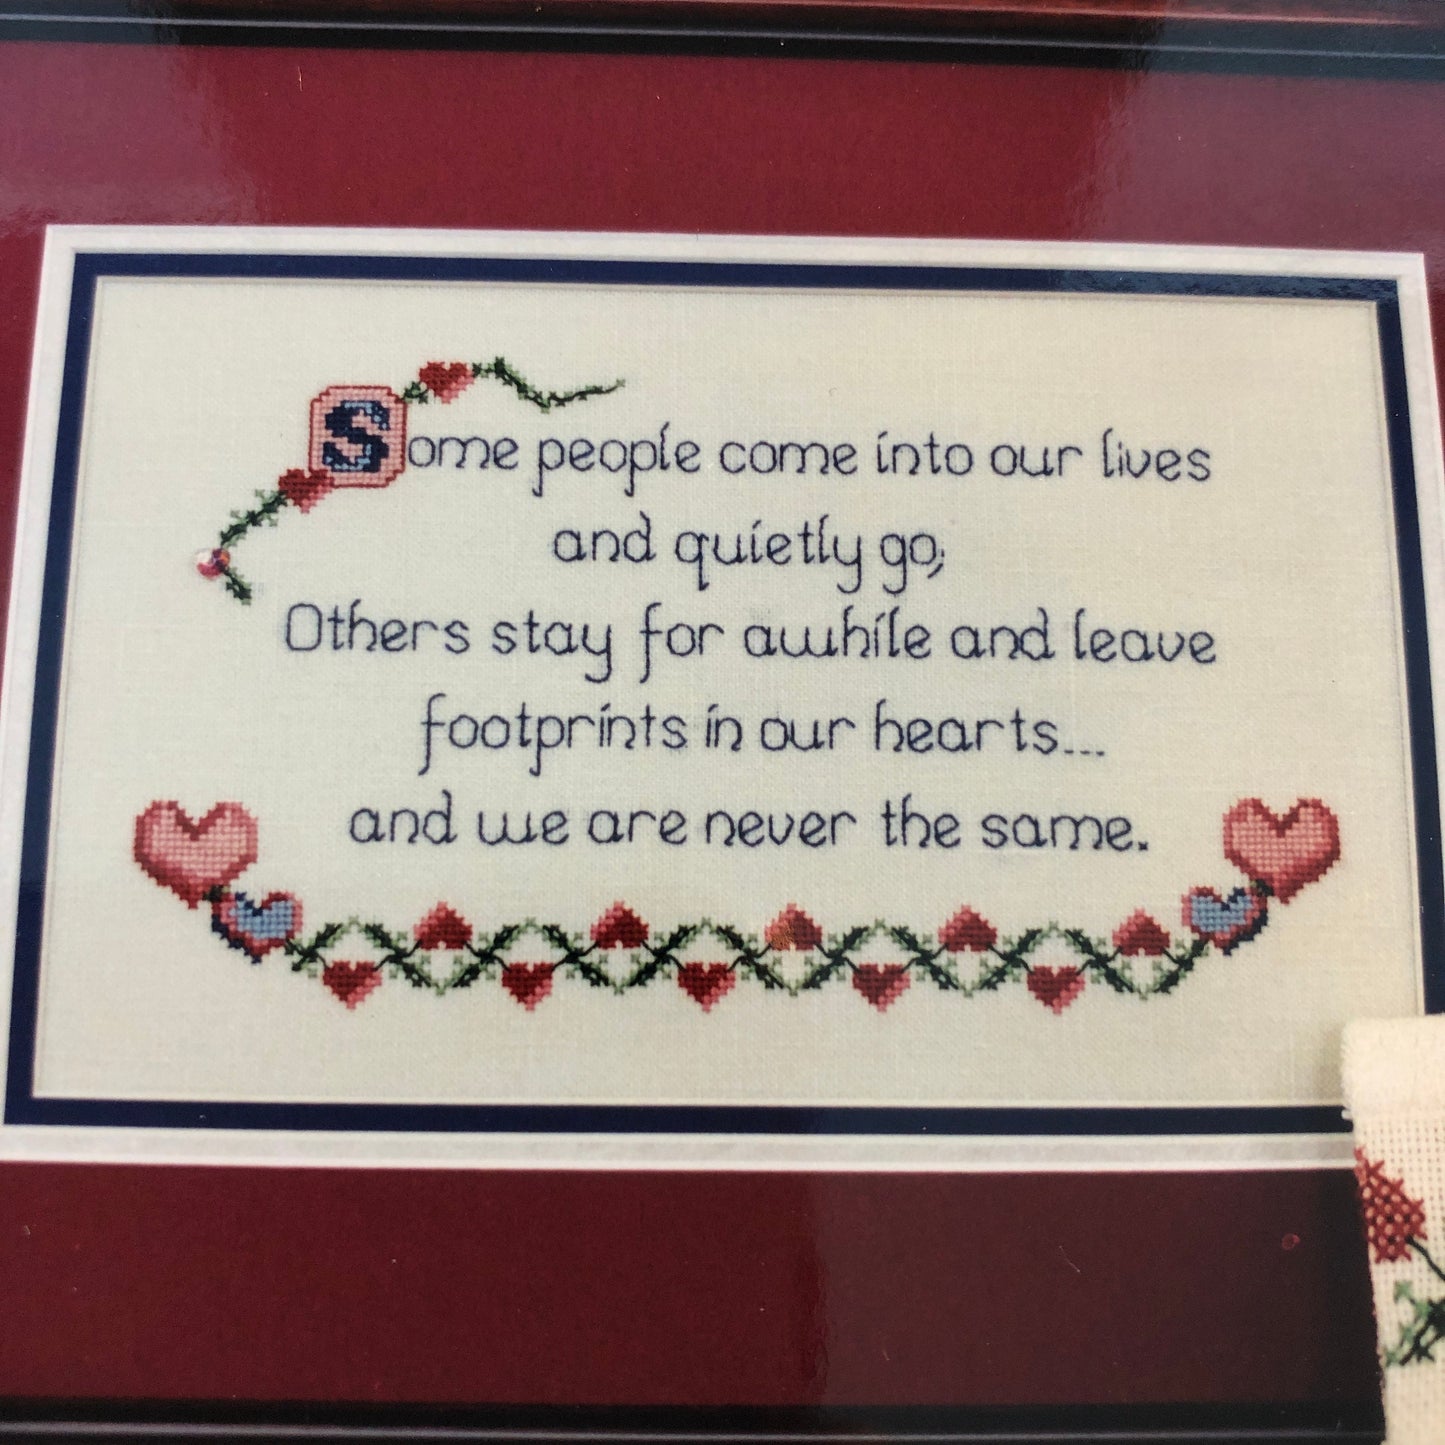 Footprints In Our Hearts, the Stitchworks, Vintage 1998, Counted Cross Stitch Design